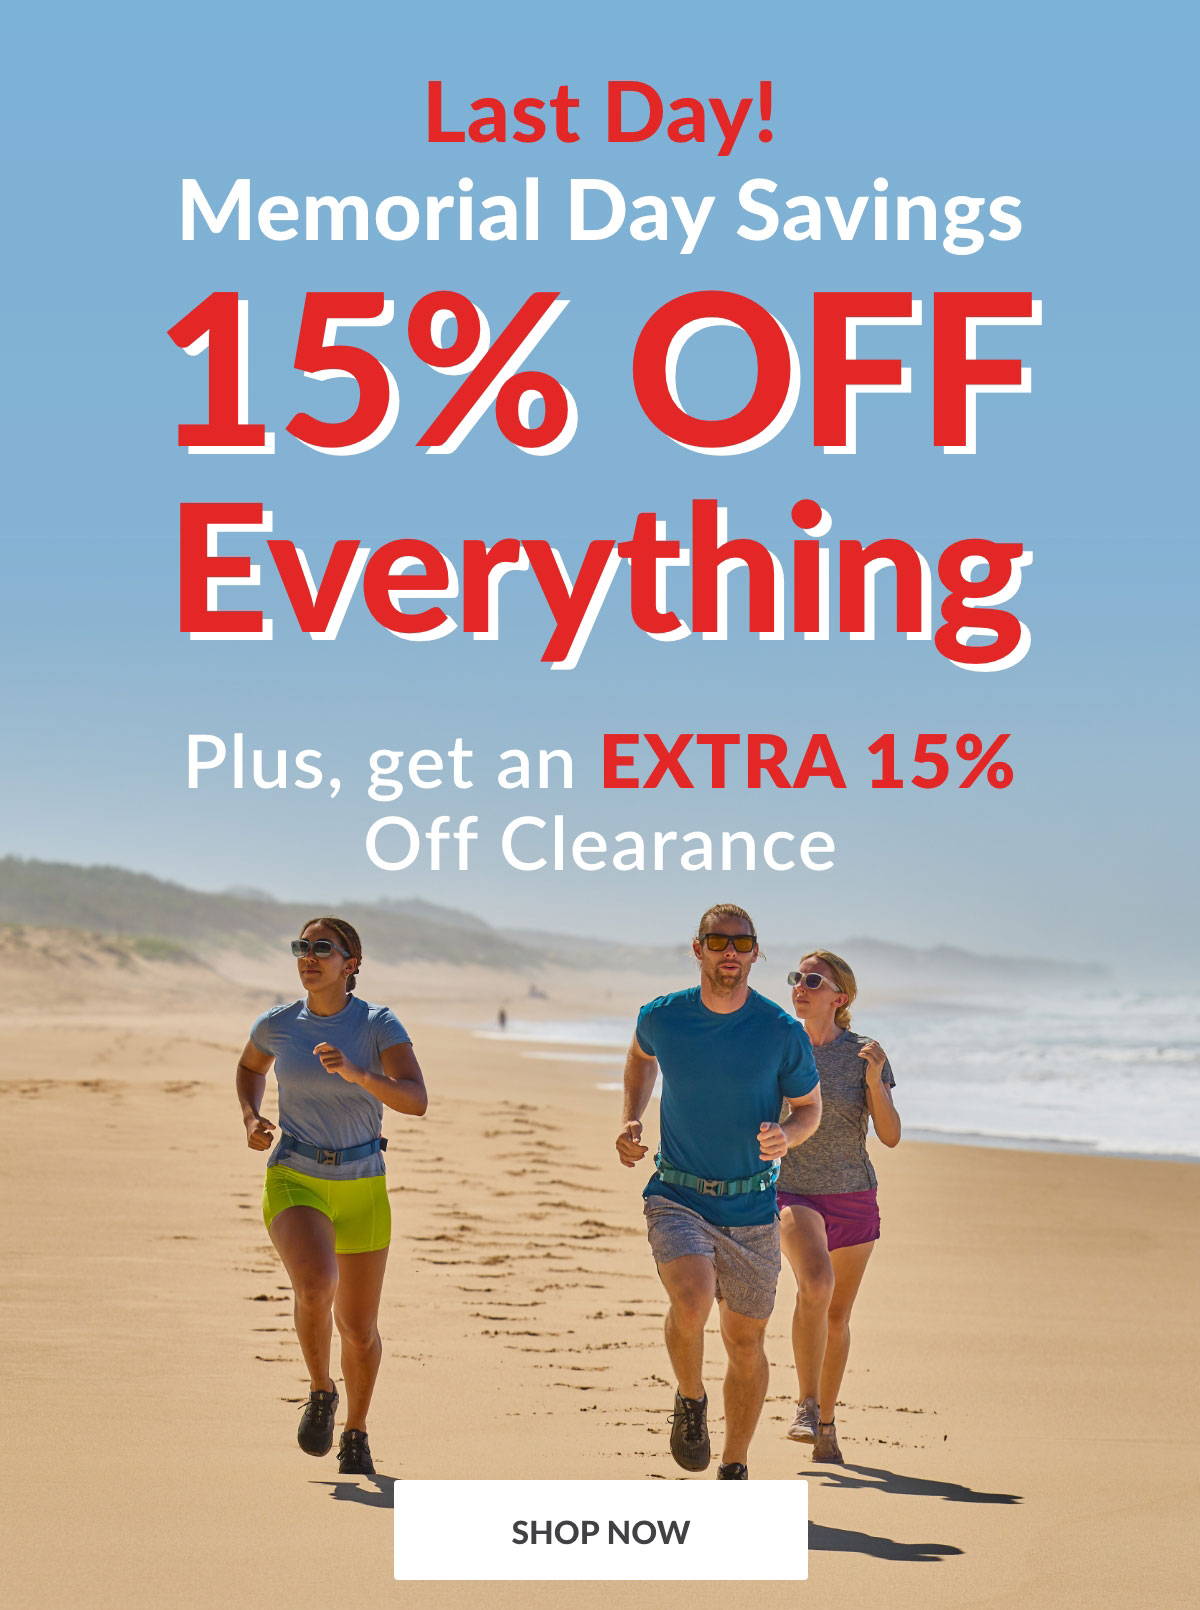 Last Day! Memorial Day Savings Start Now - 15% OFF Everything - Plus, get an EXTRA 15% OFF Clearance  - SHOP NOW